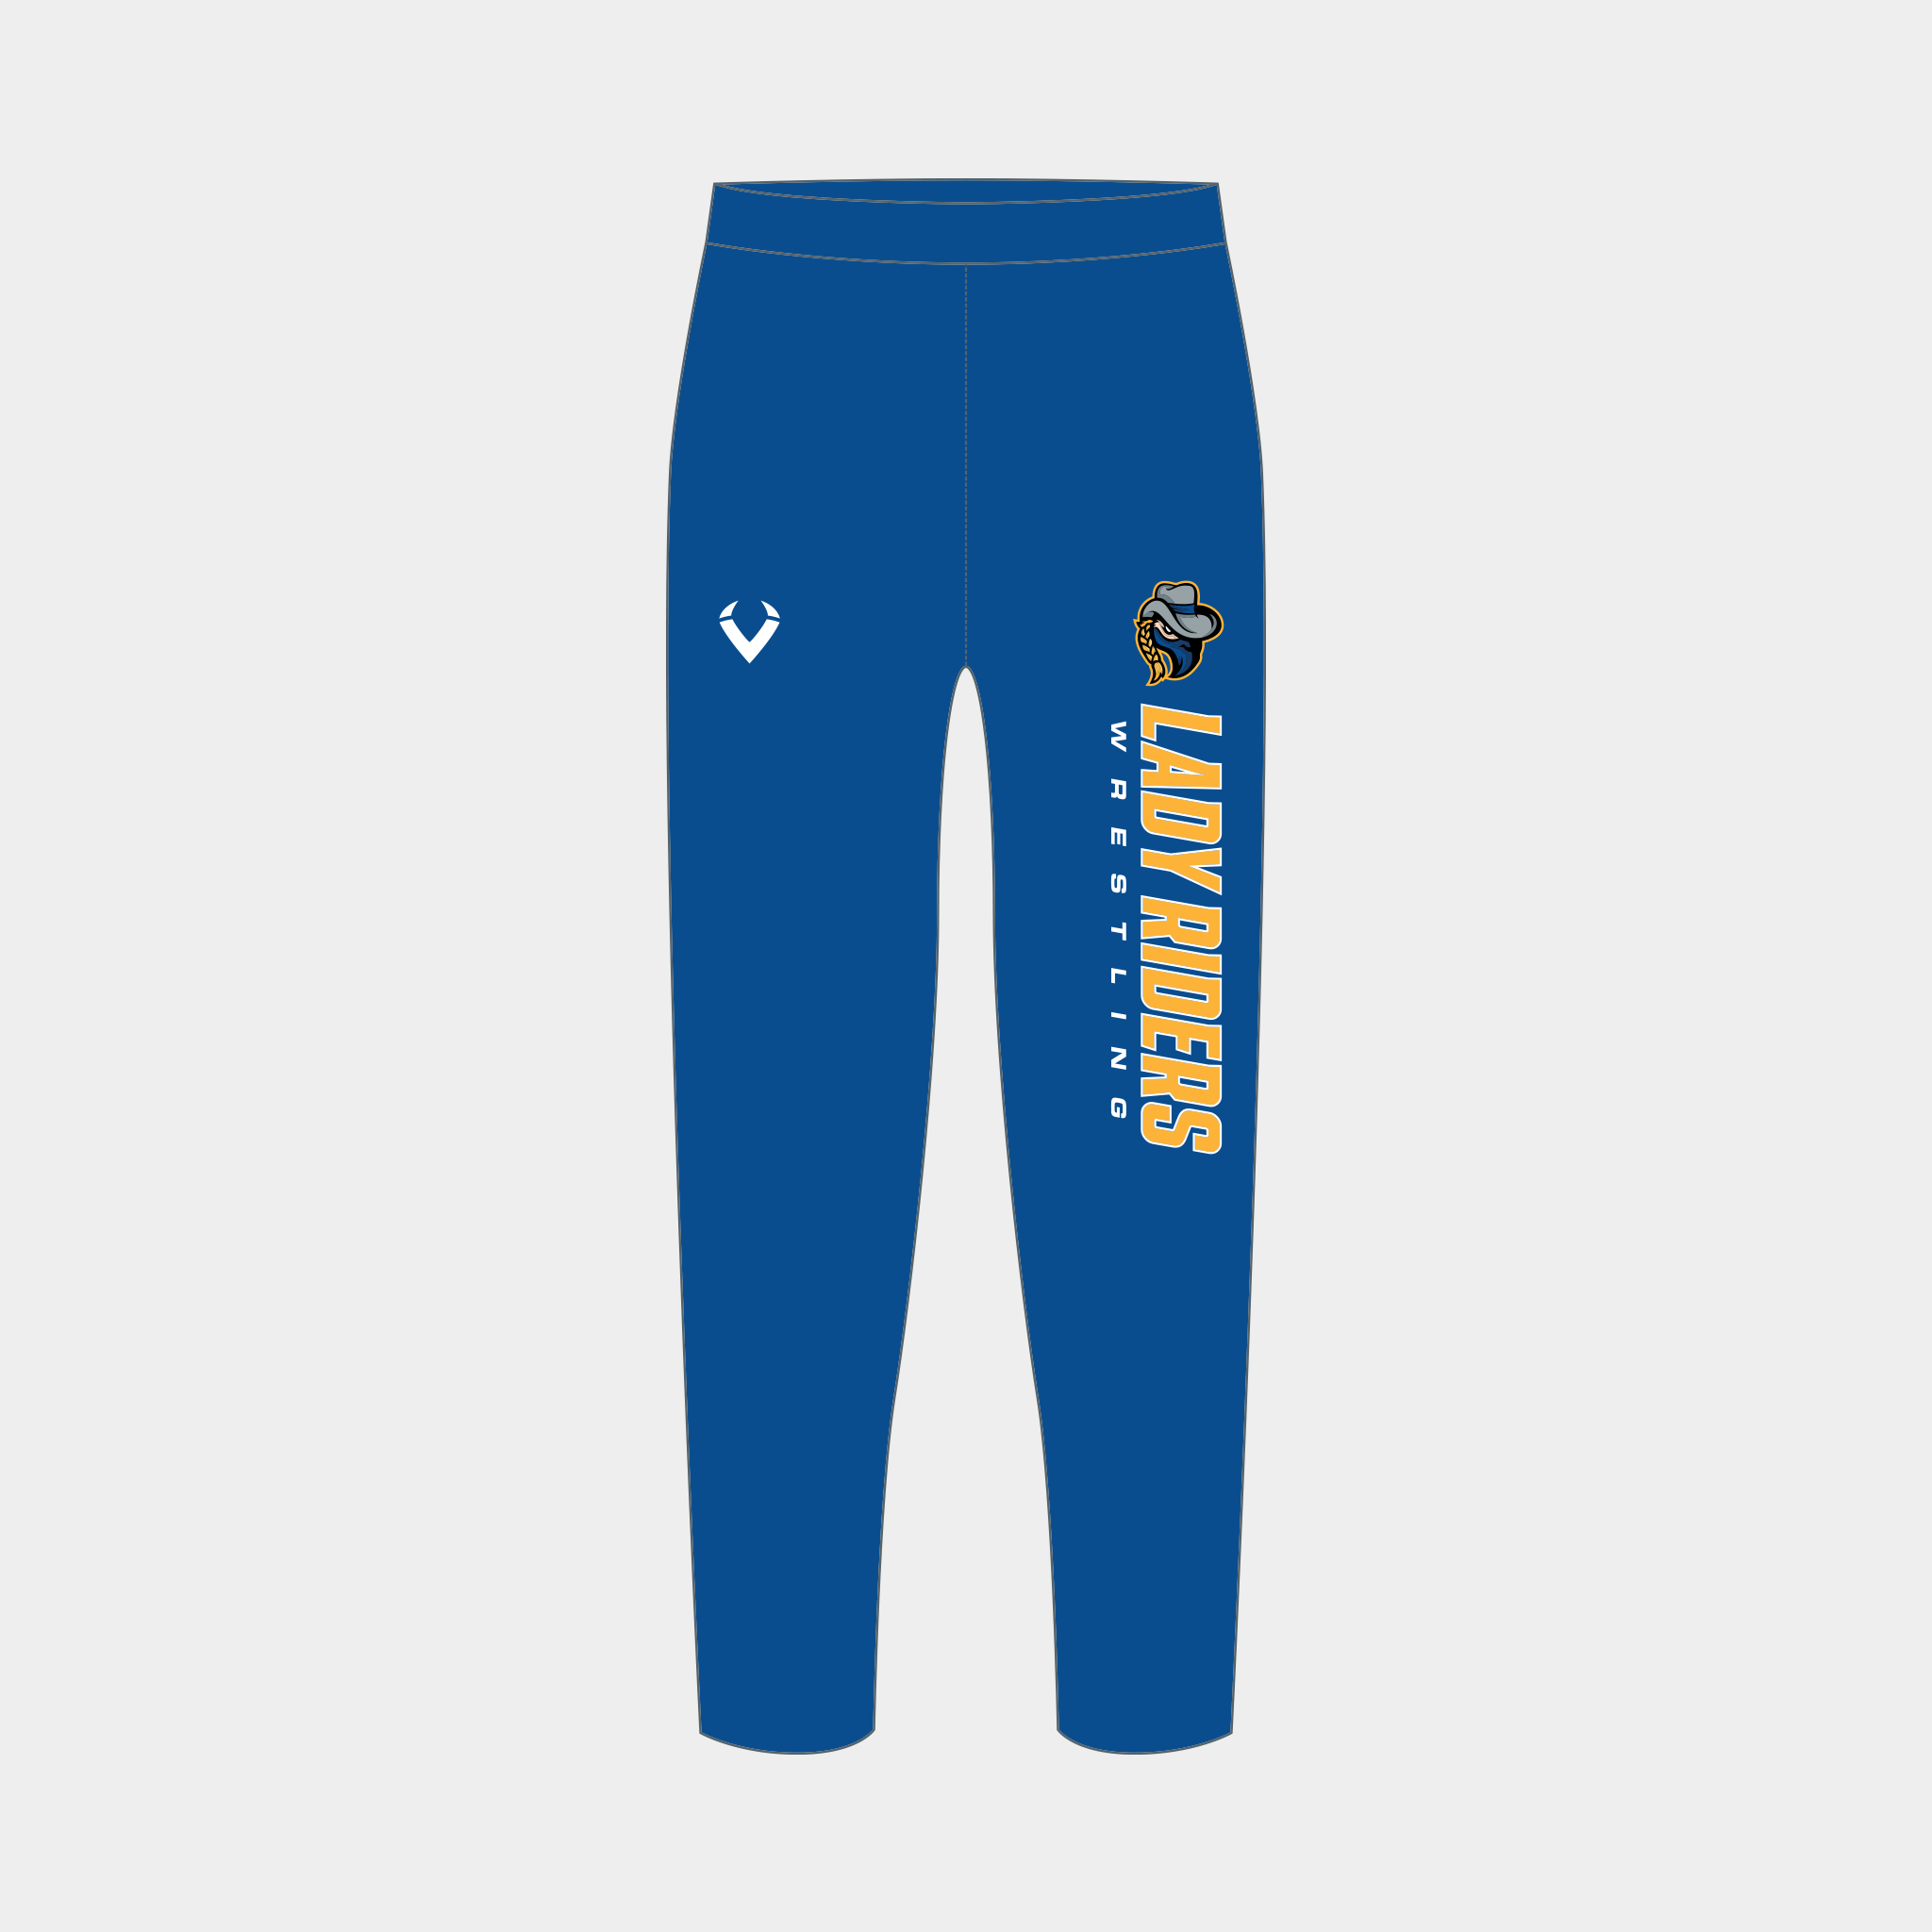 Lady Riders - Warm Up Pant